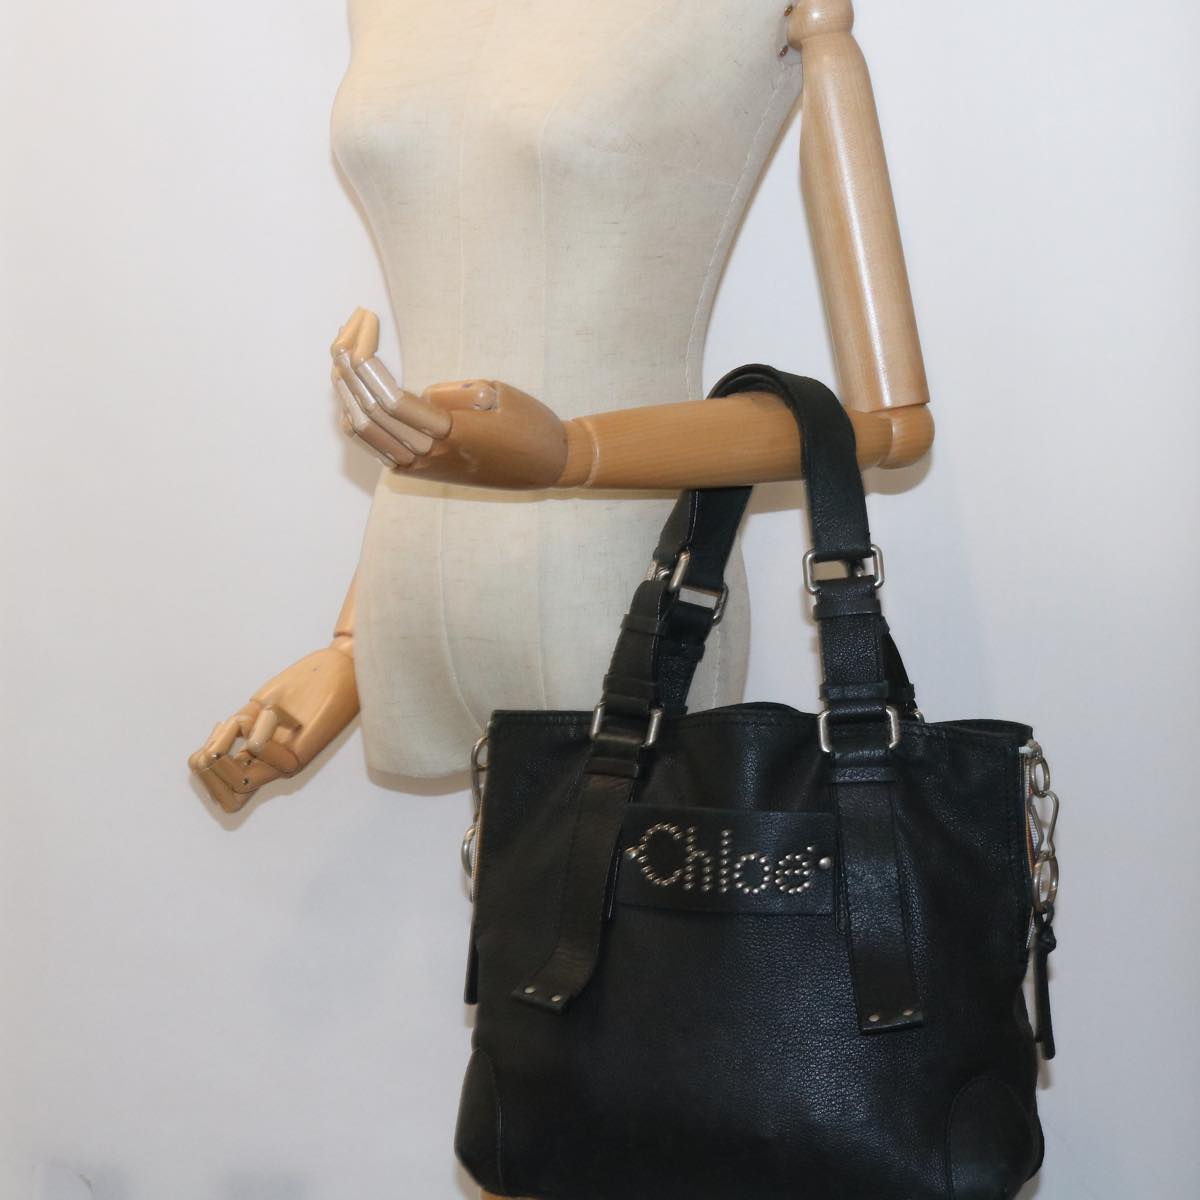 Chloe Tote Bag Leather Black Auth bs9712